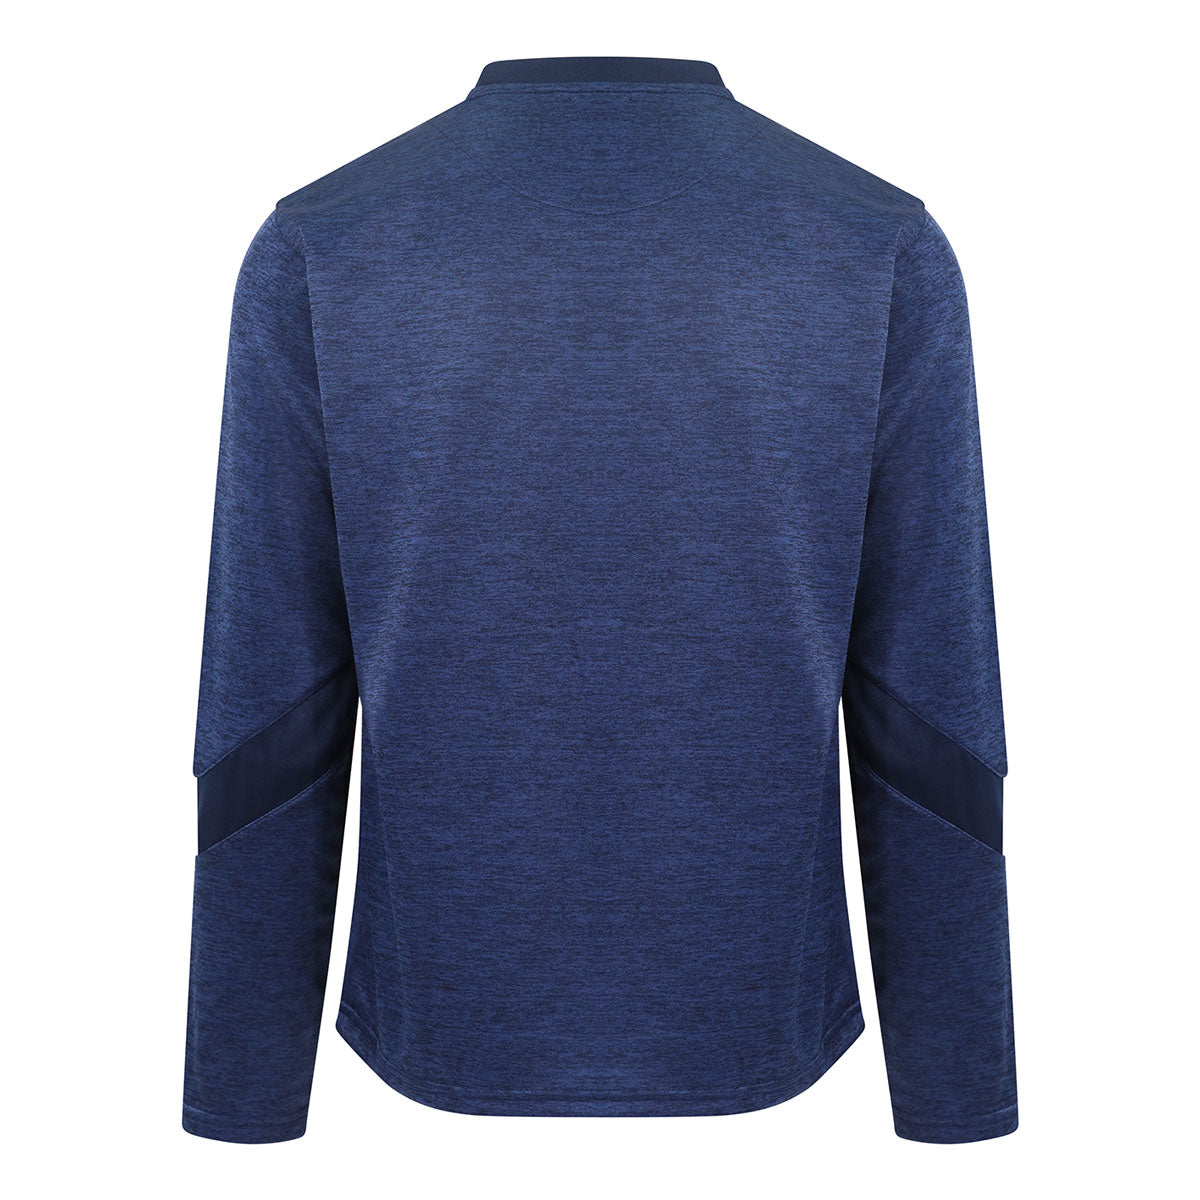 Mc Keever CLG Ghaoth Dobhair Core 22 Sweat Top - Adult - Navy